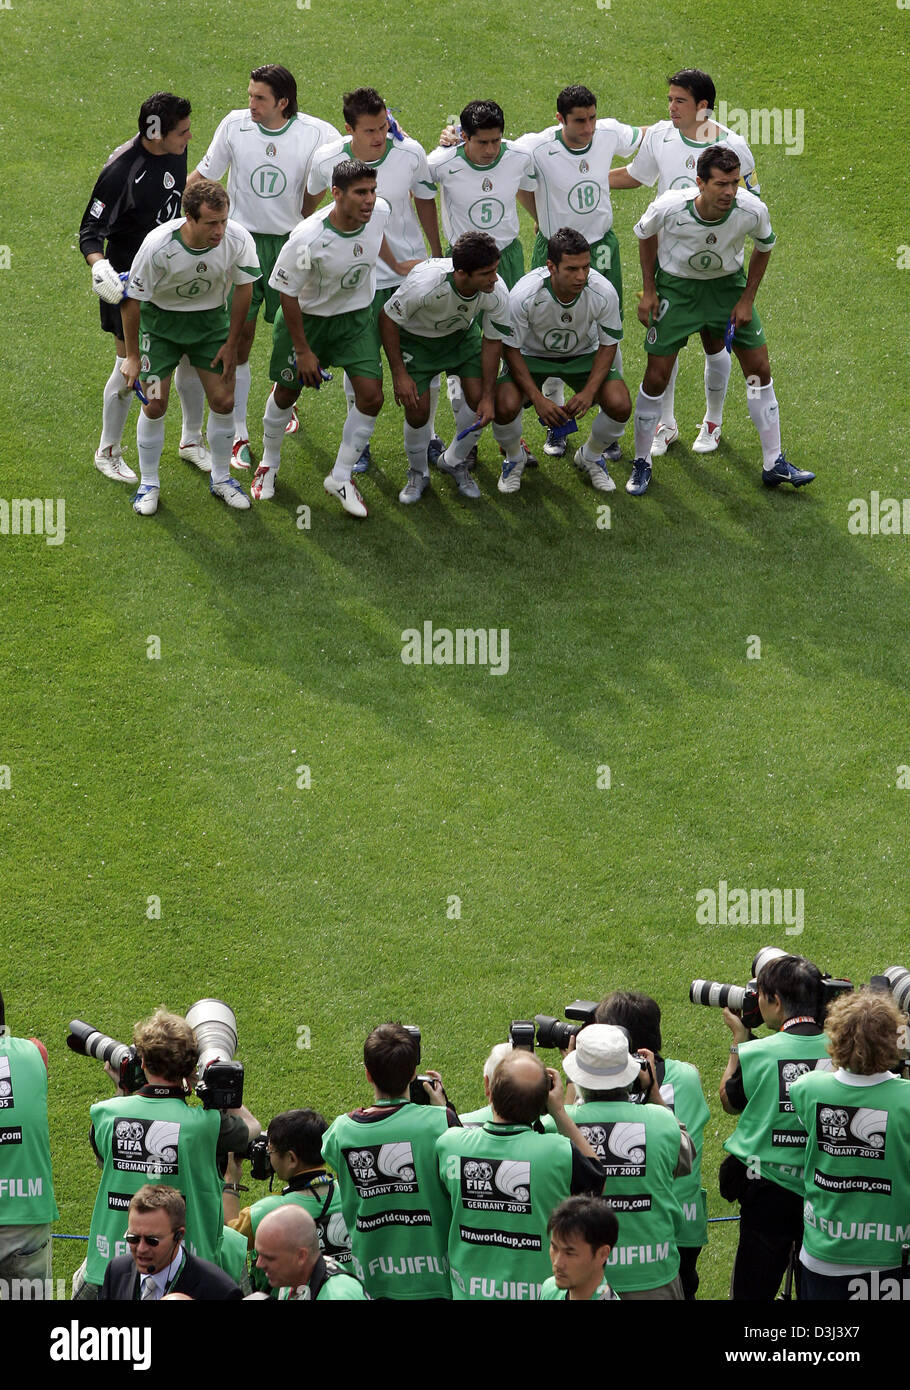 (dpa) - The Mexican national soccer team lines up for a group photograph prior to the FIFA Confederations Cup match Japan vs. Mexico in the AWD Arena in Hanover, Germany, 16 June 2005. Back row (from L to R): Oswaldo Sanchez, Jose Fonseca, Aaron Galindo, Ricardo Osorio, Salvador Carmona, Pavel Pardo, front row (from L to R): Gerardo Torrado, Carlos Salcido, Zinha, Jaime Lozano, Jar Stock Photo